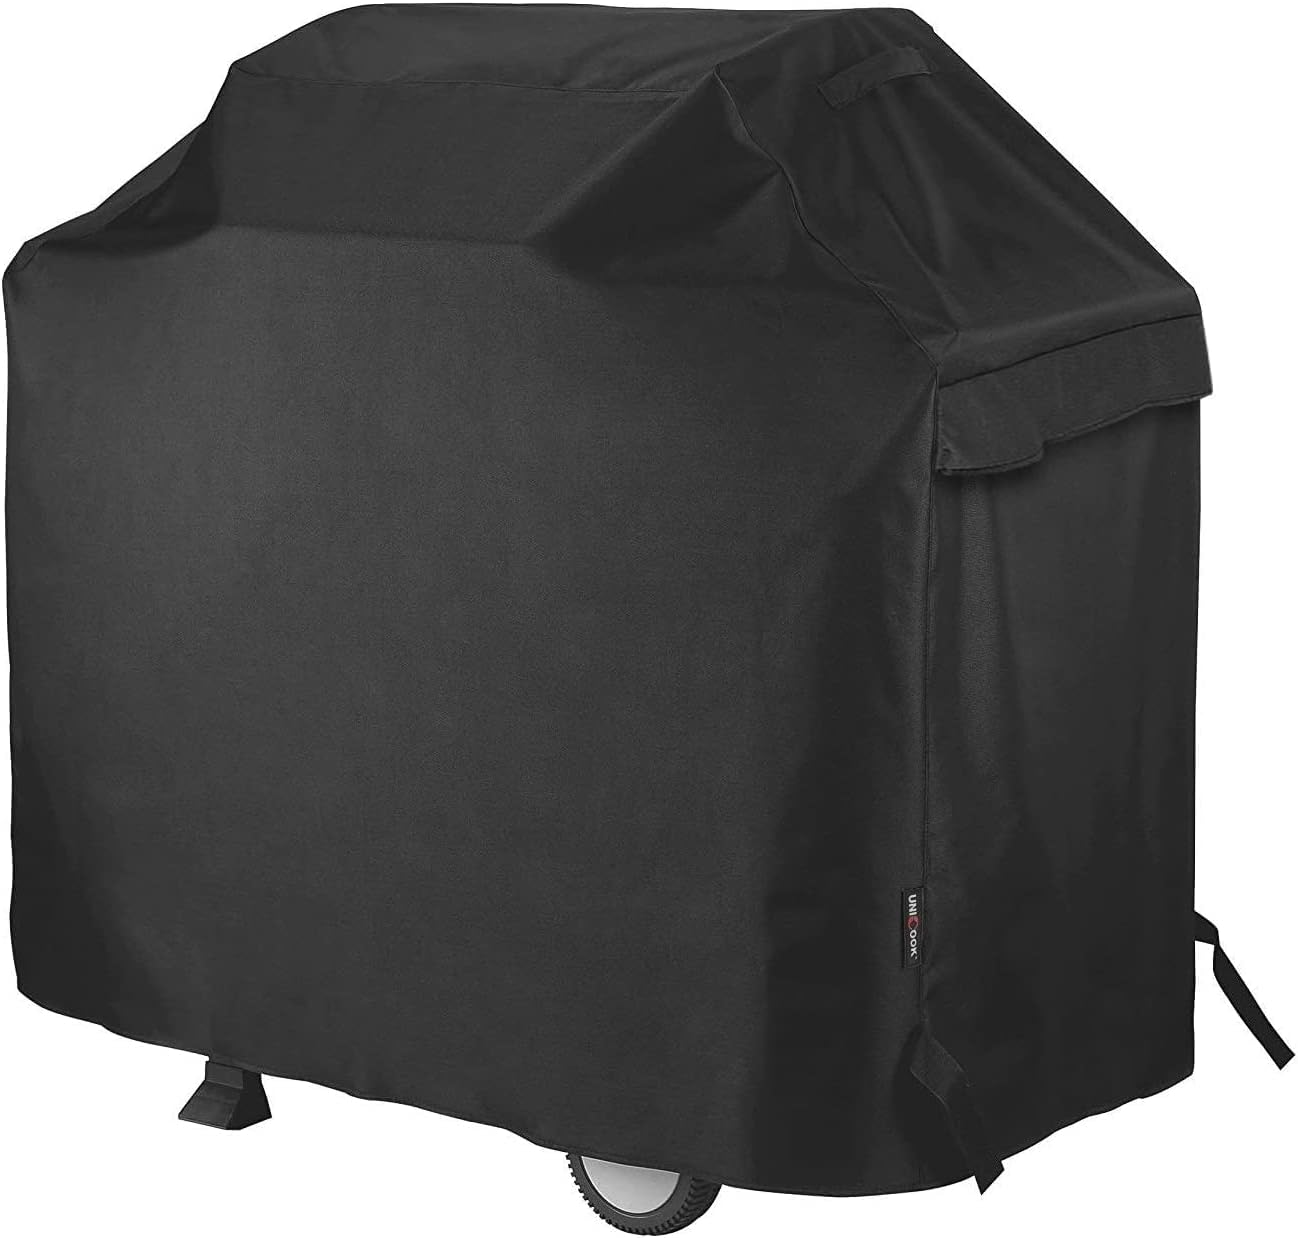 Extra Large BBQ Gas Grill Cover Barbecue Waterproof Outdoor Heavy Duty Protector 